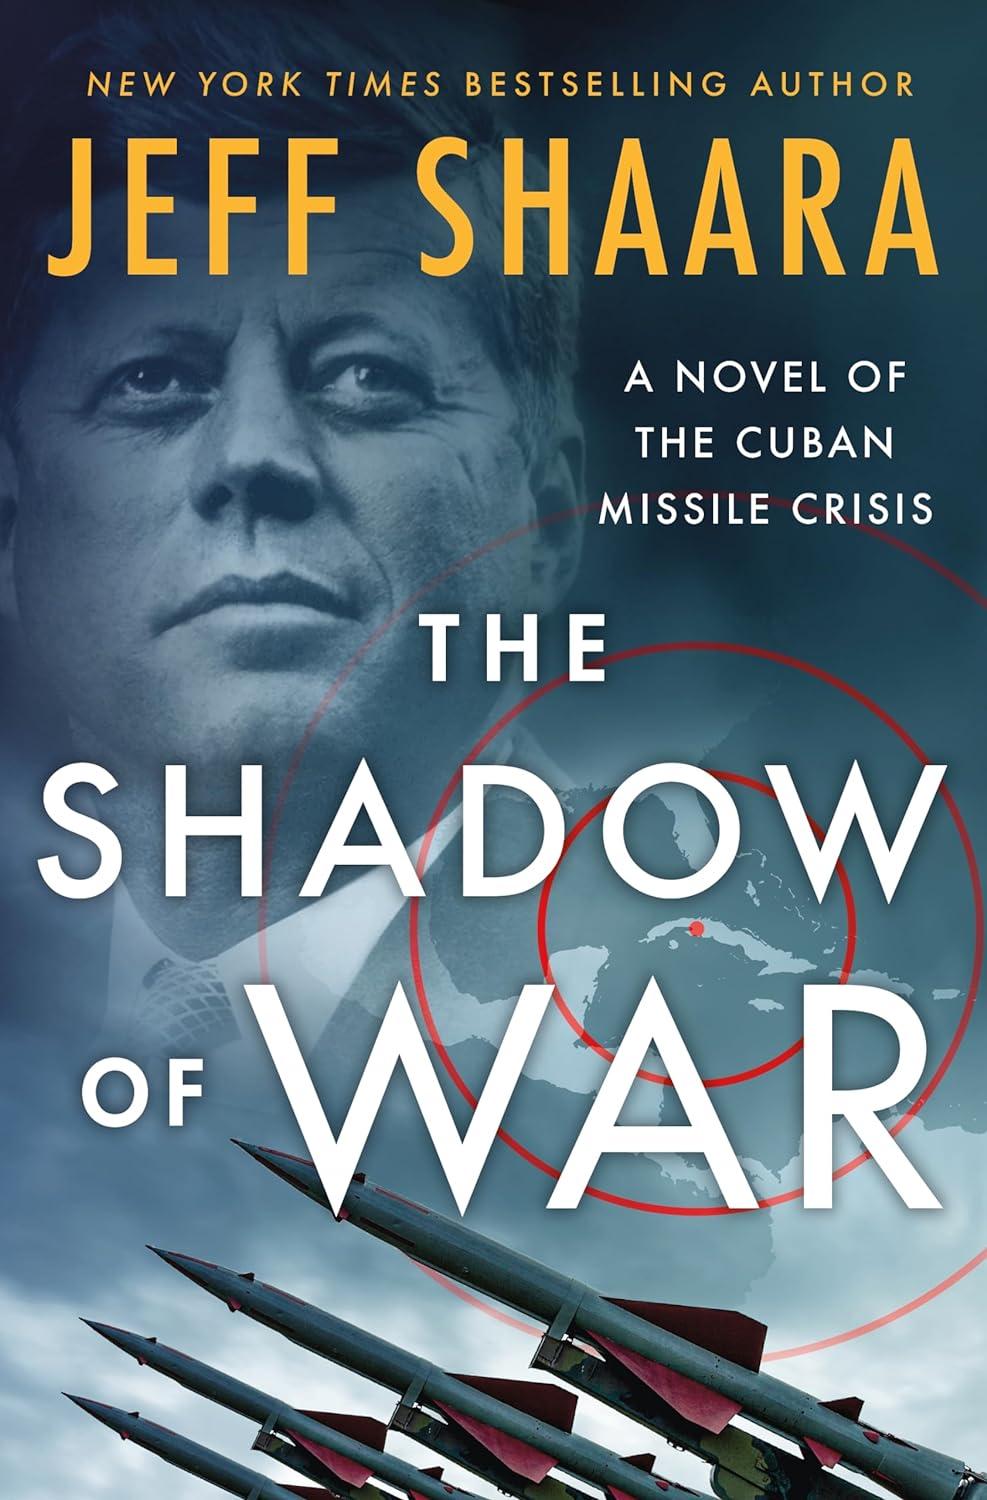 "The Shadow of War: A Novel of the Cuban Missile Crisis," by Jeff Shaara.